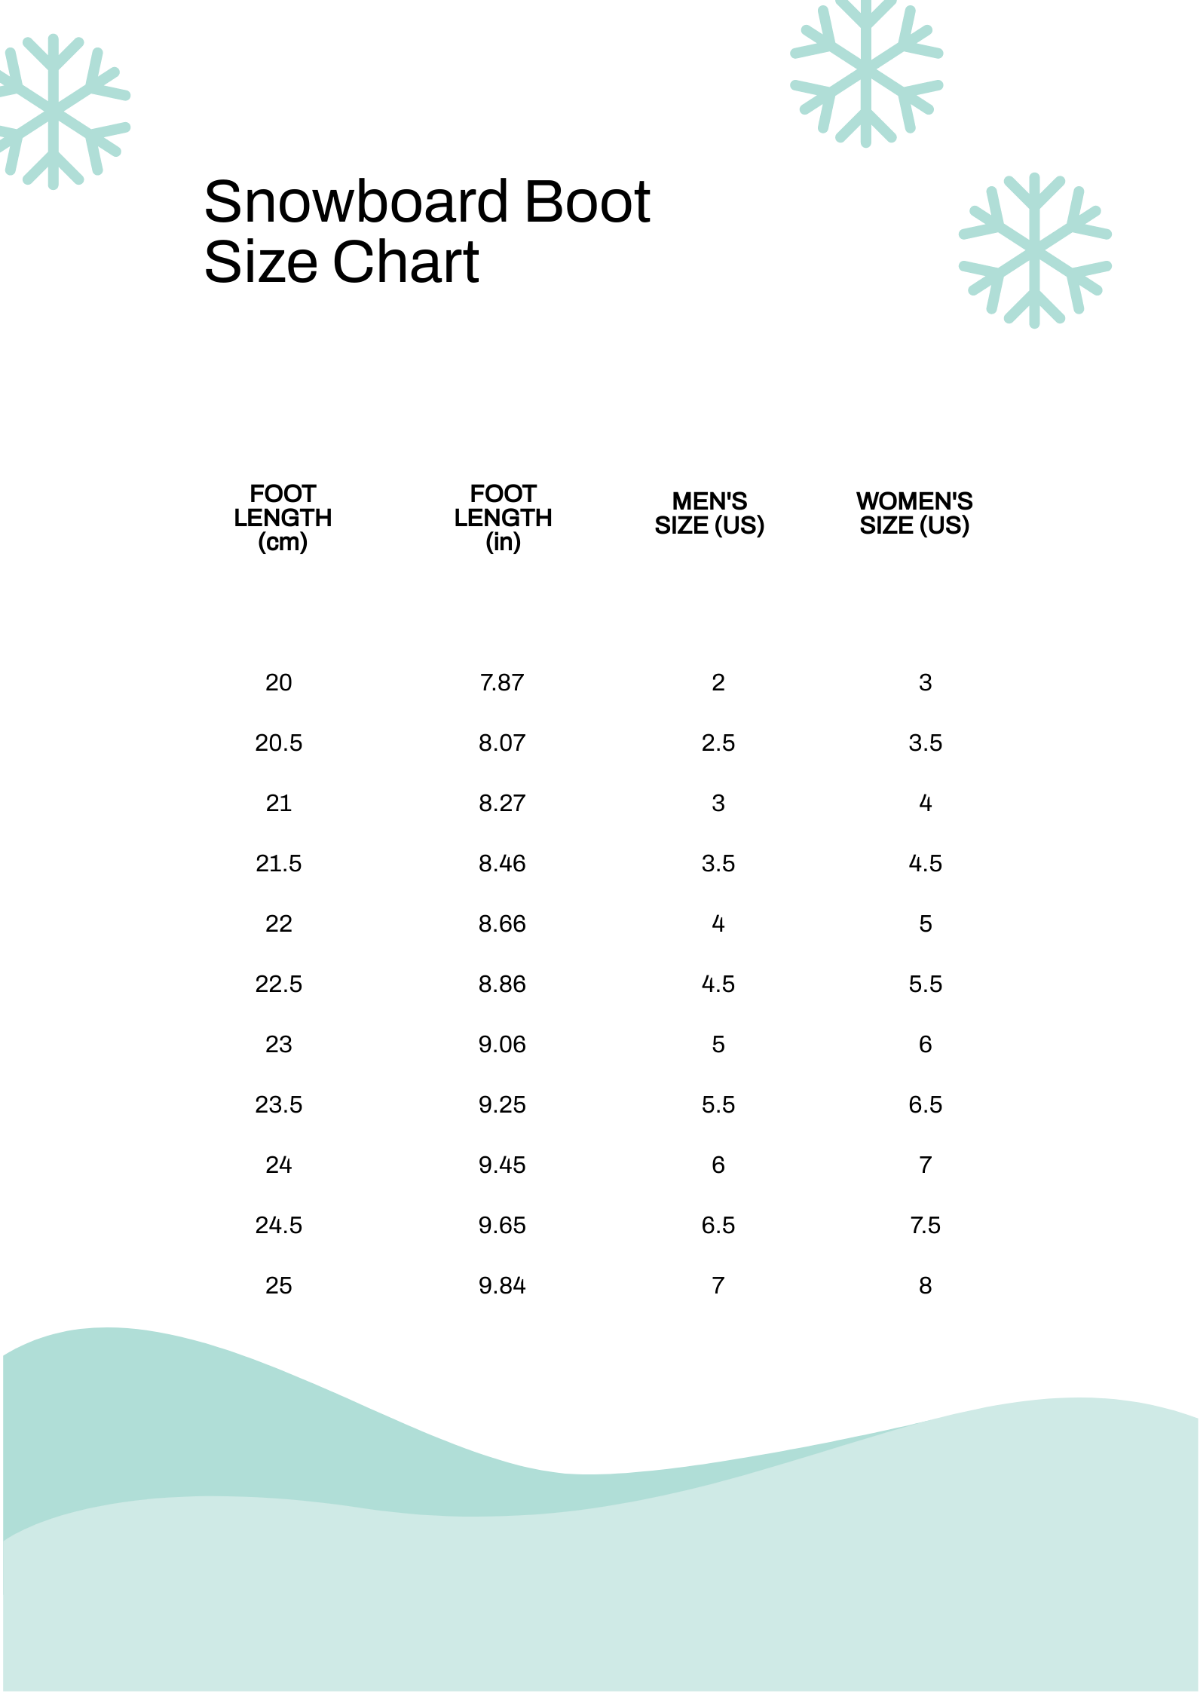 Snowboard Boot Size Chart Template